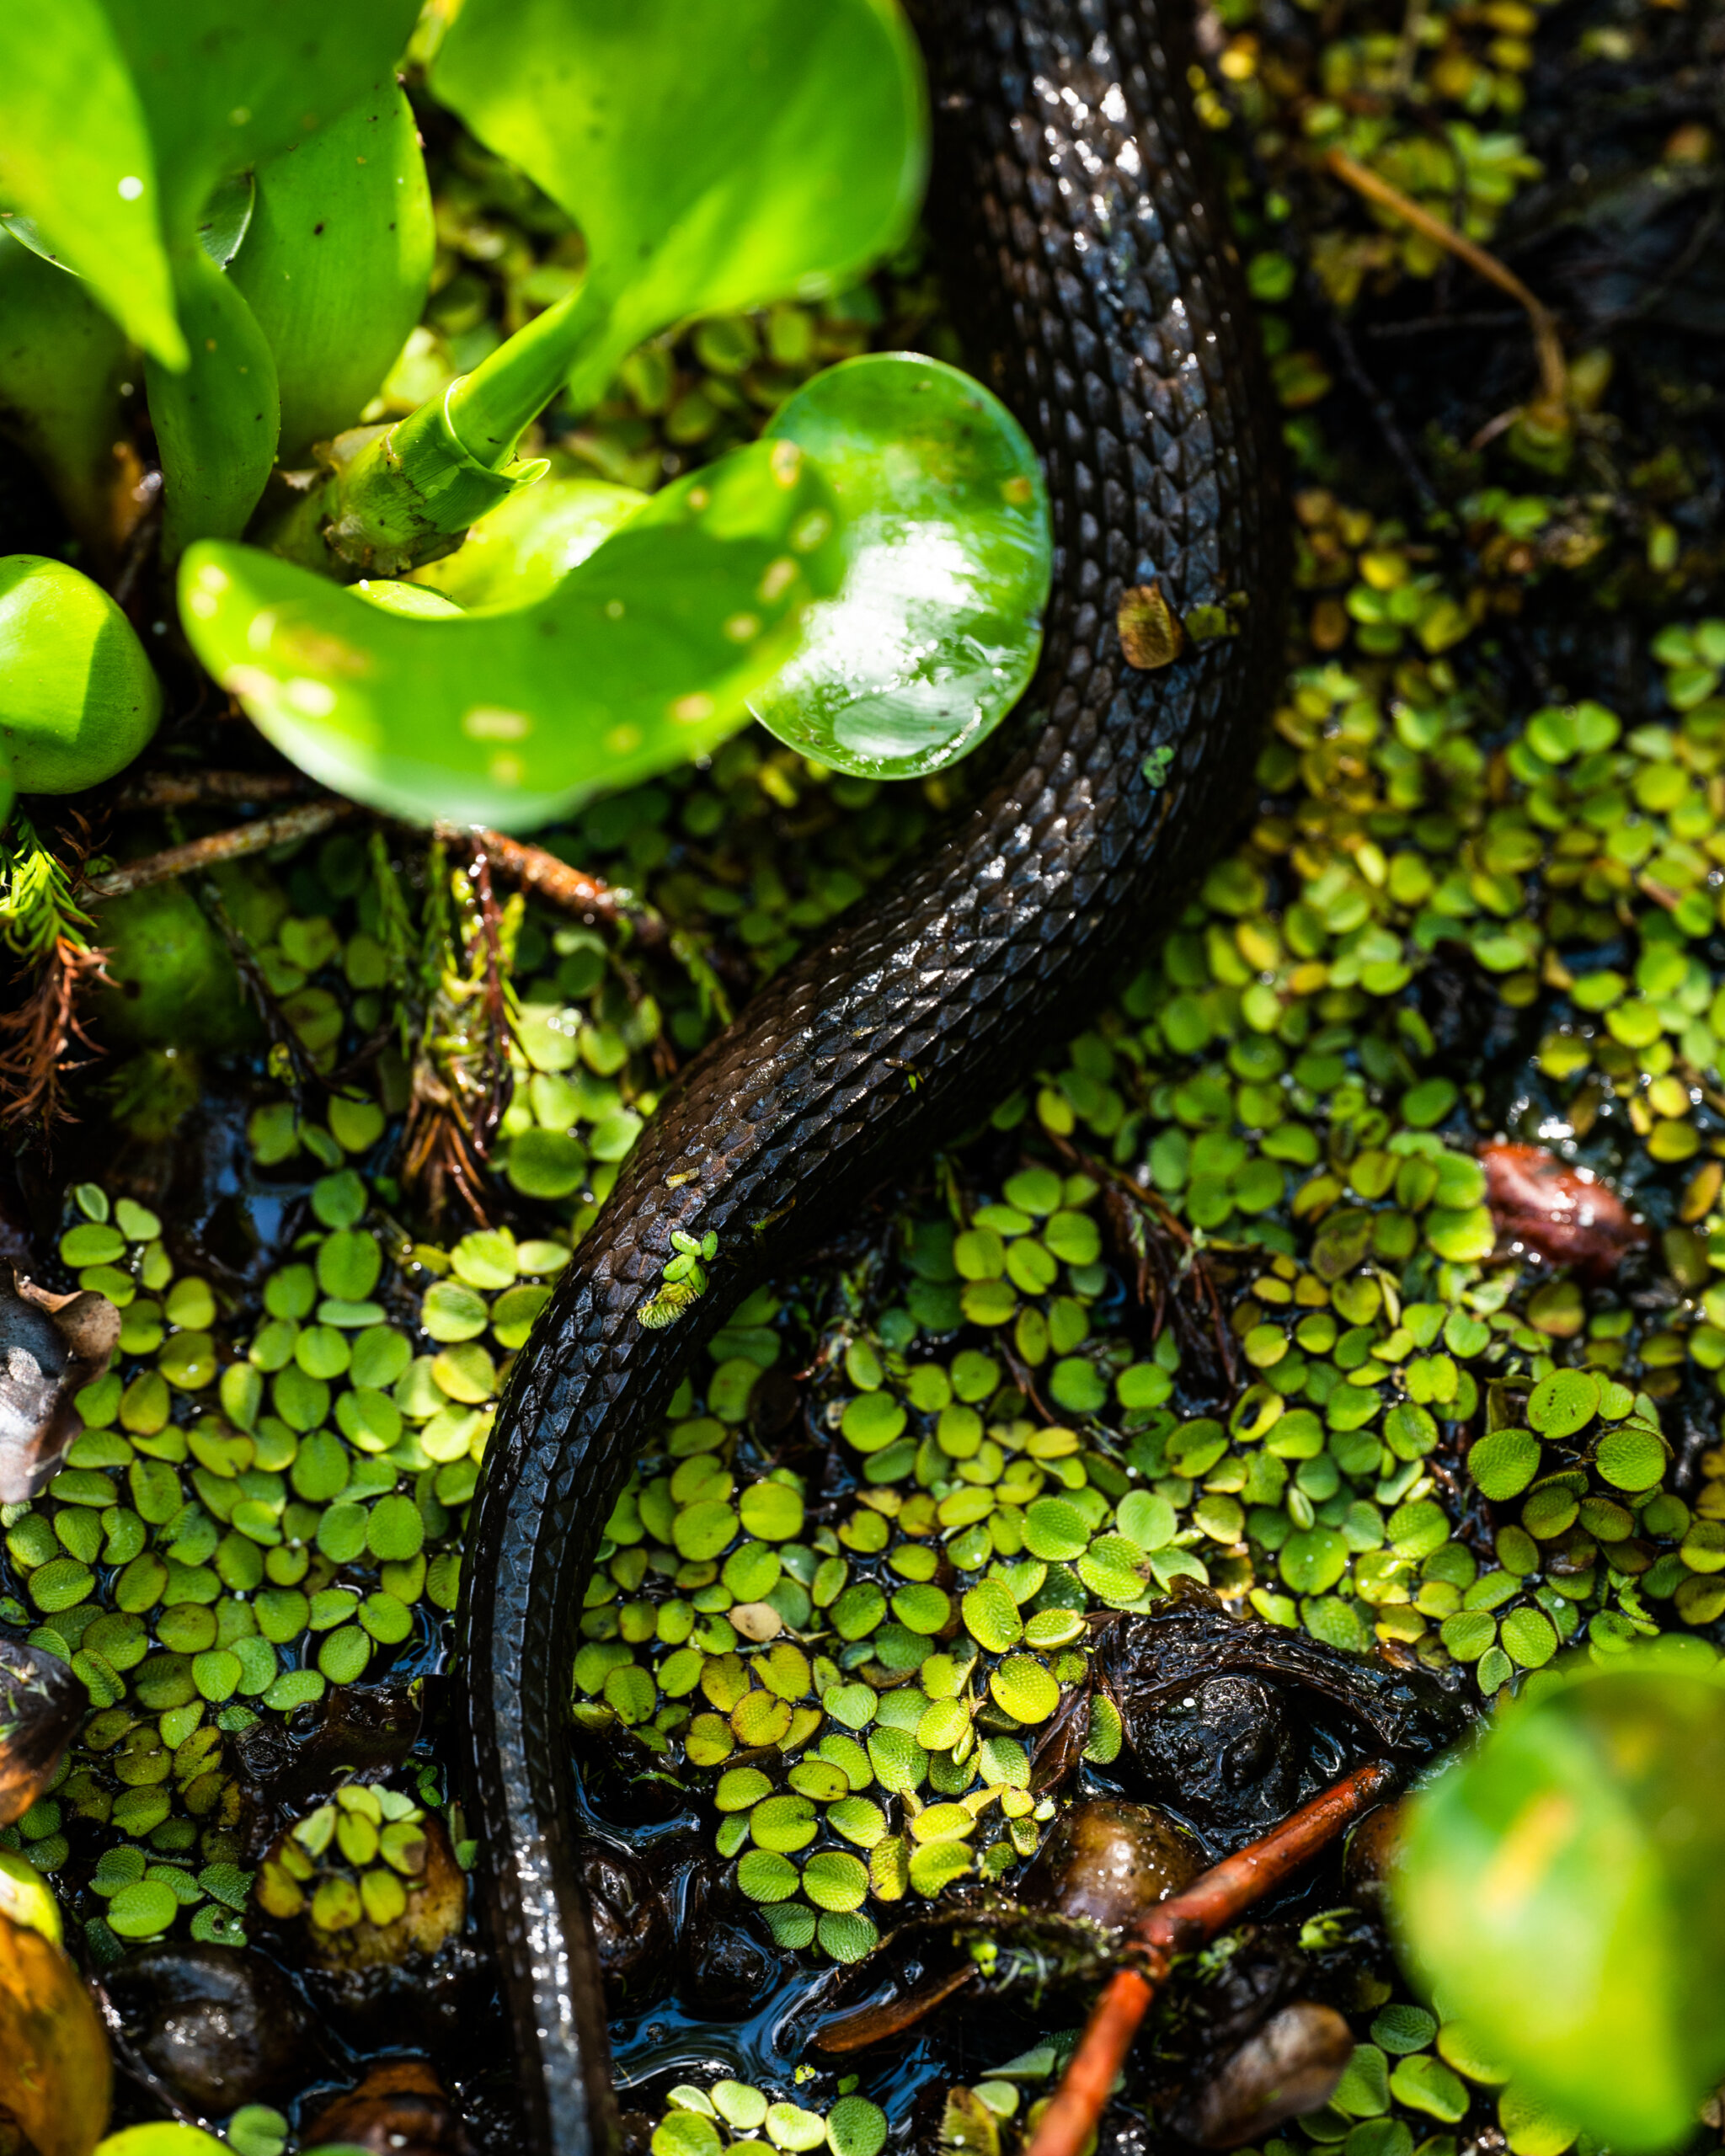 Curves of a snake slithering through the swamp